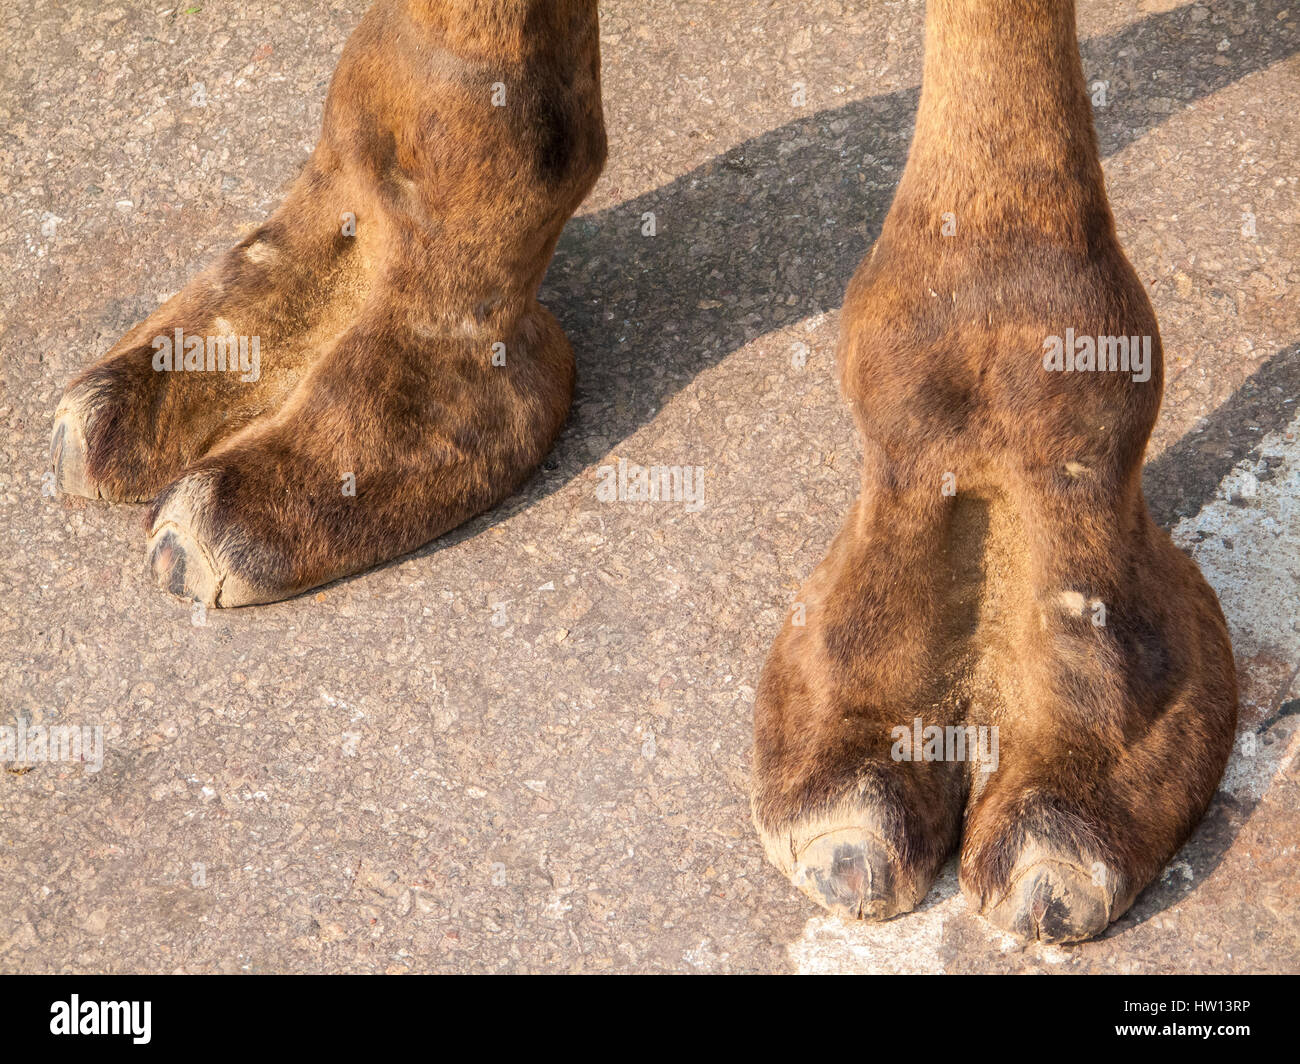 Camel Foot High Resolution Stock Photography and Images - Alamy